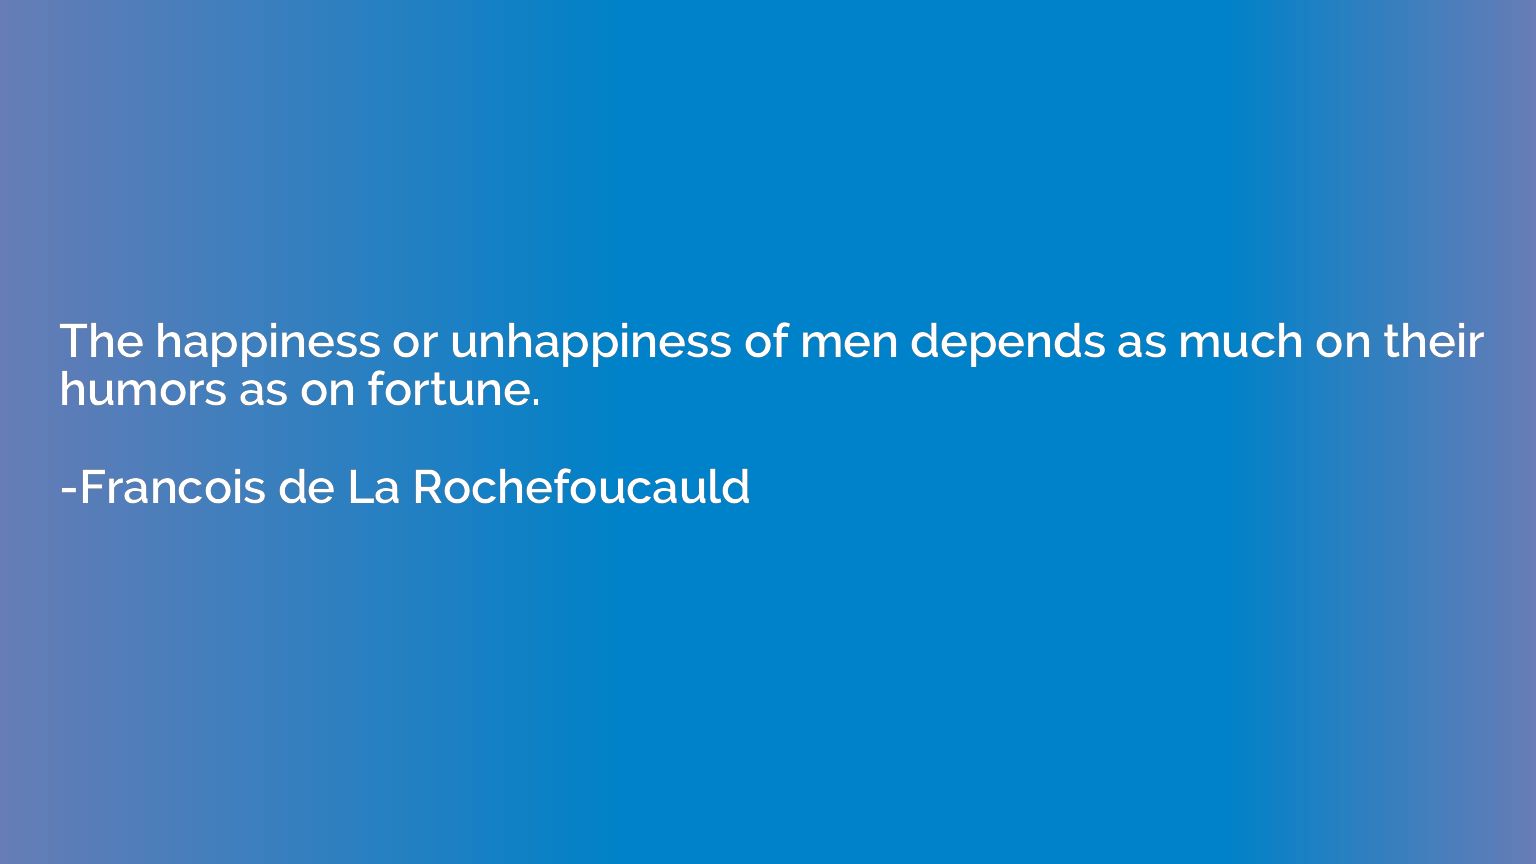 The happiness or unhappiness of men depends as much on their